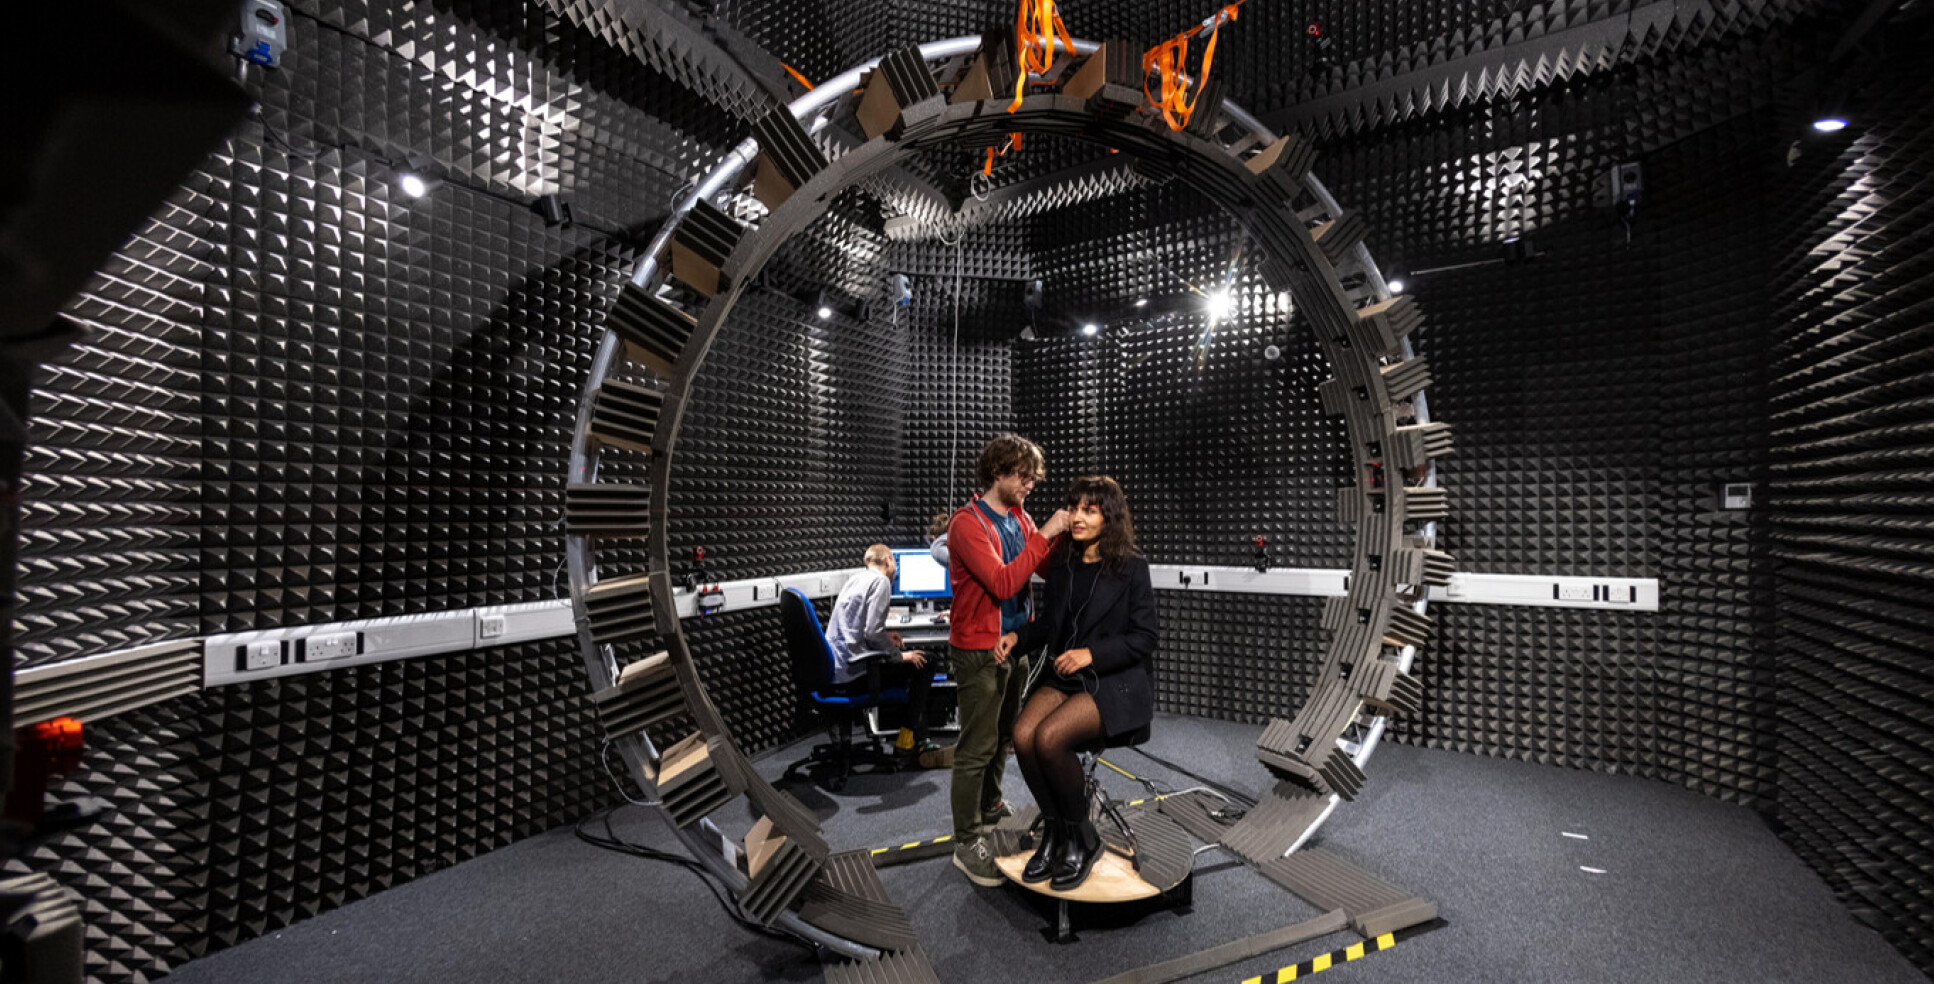 An audio research space at Imperial’s Dyson School of Design Engineering.